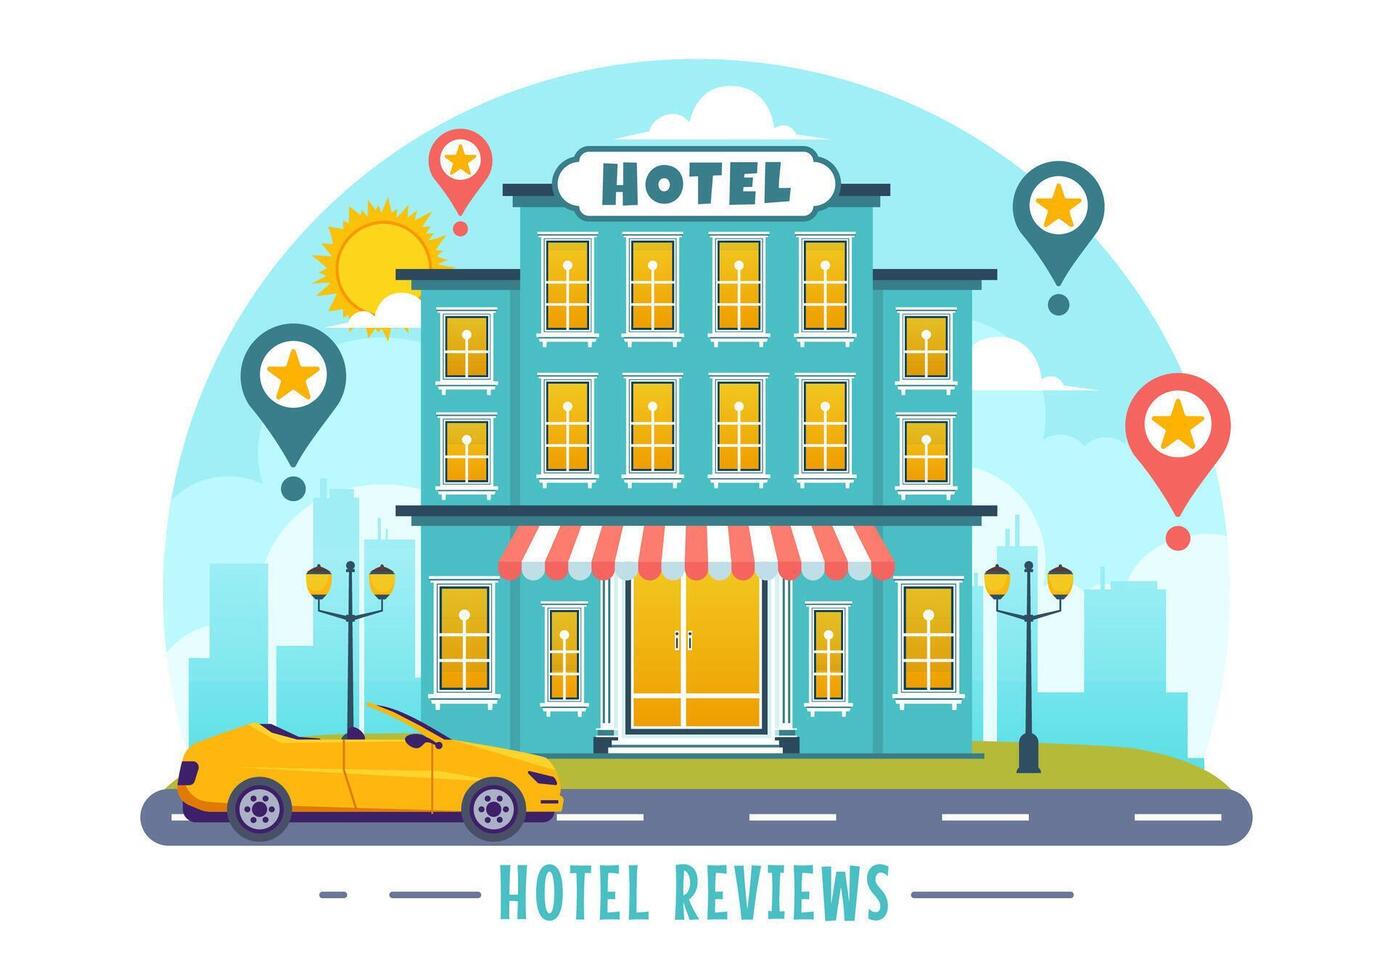 Hotel Reviews Vector Illustration with Rating Service, User Satisfaction to Rated Customer, Product or Experience in Flat Cartoon Background